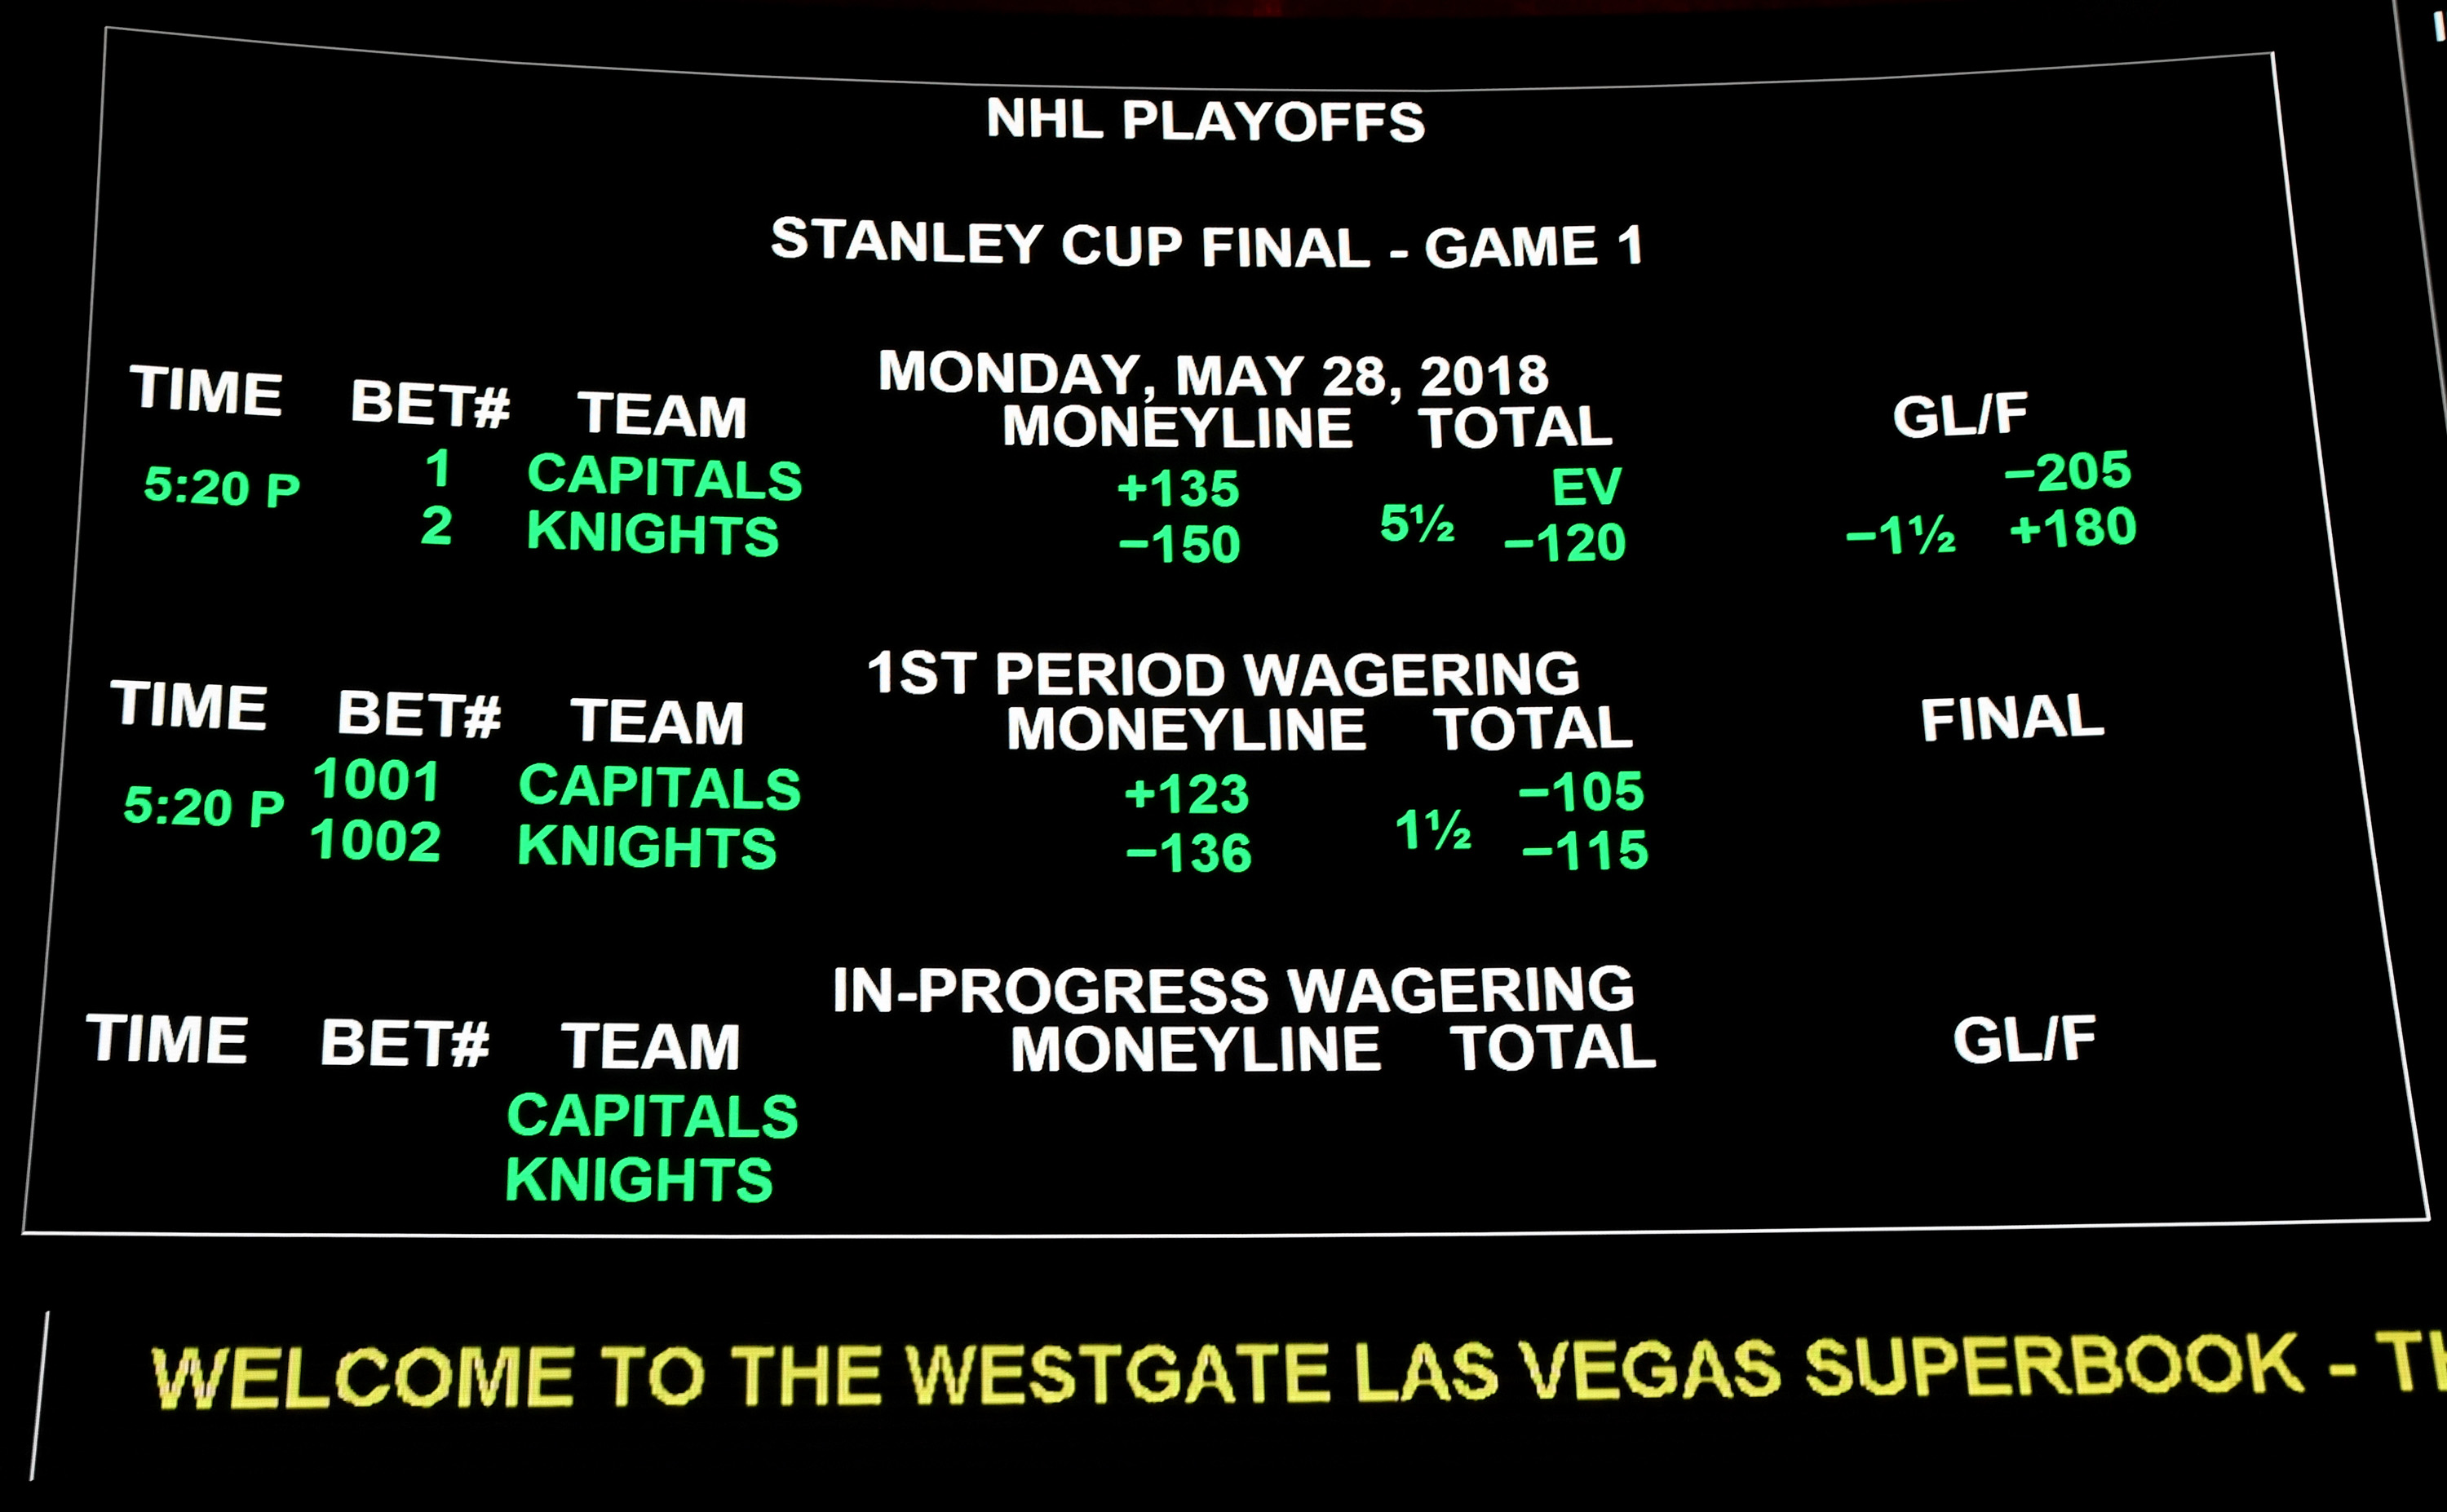 Betting Lines Released For Stanley Cup Final At The Westgate Las Vegas